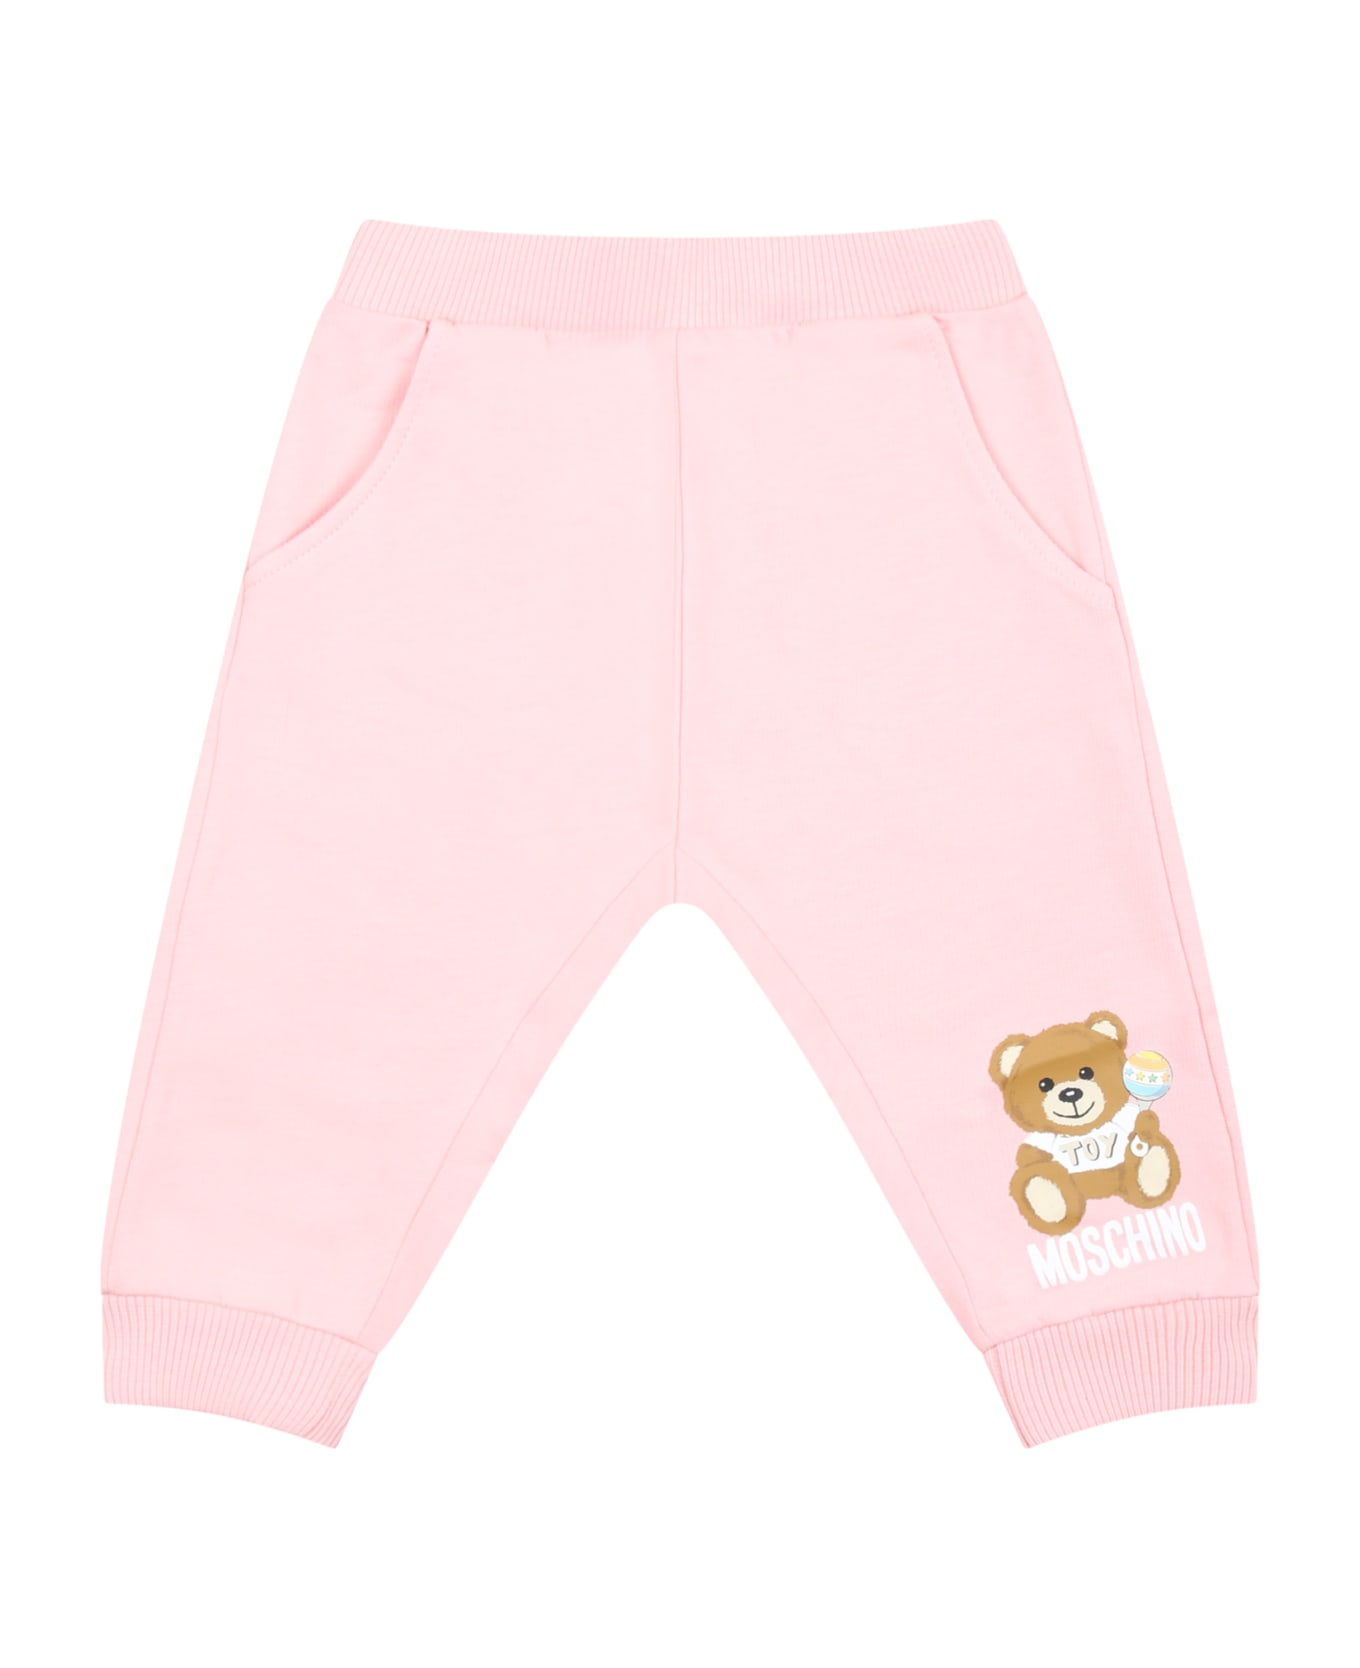 Moschino Pink Sweatpants For Baby Girl With Teddy Bear - Pink